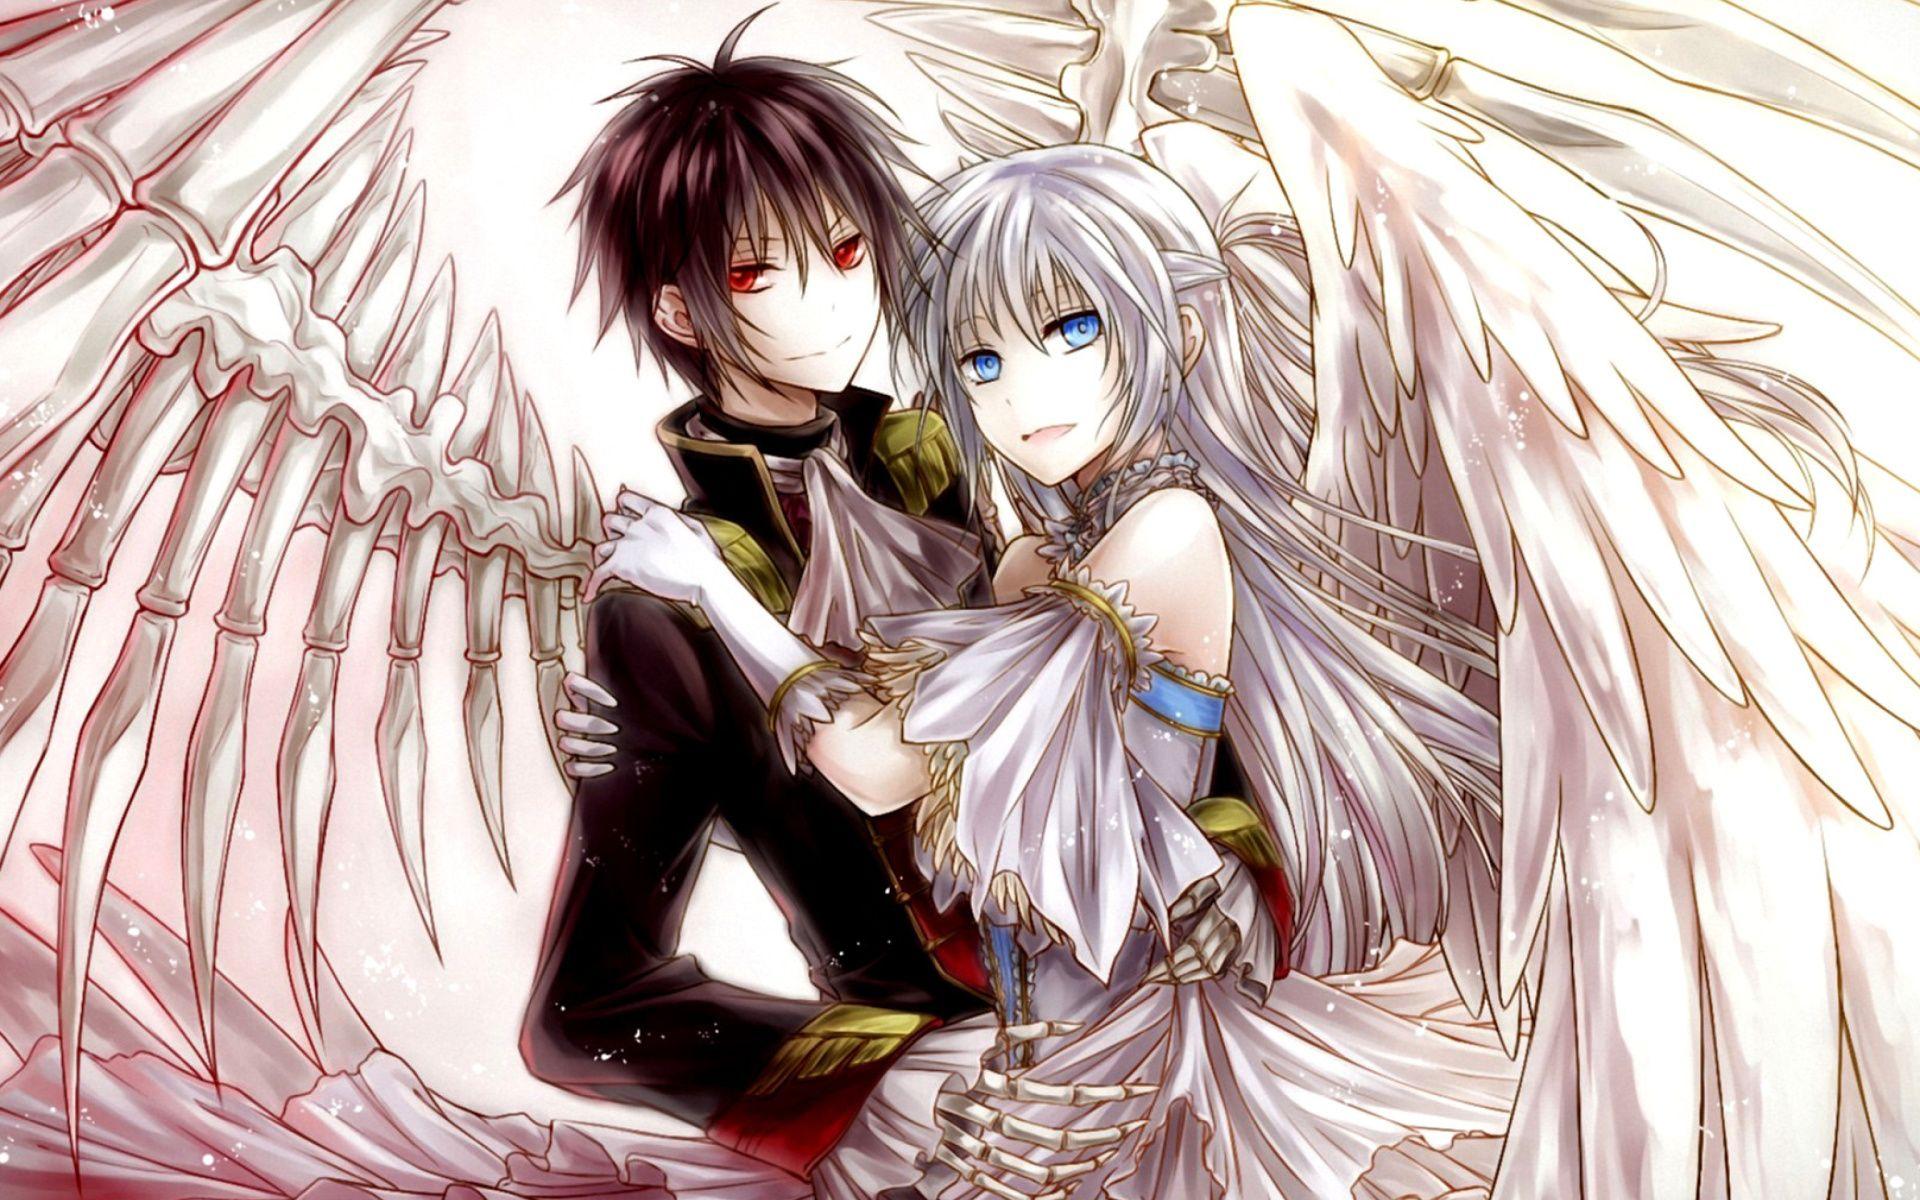 Cute Anime Couples Wallpaper Free Cute Anime Couples